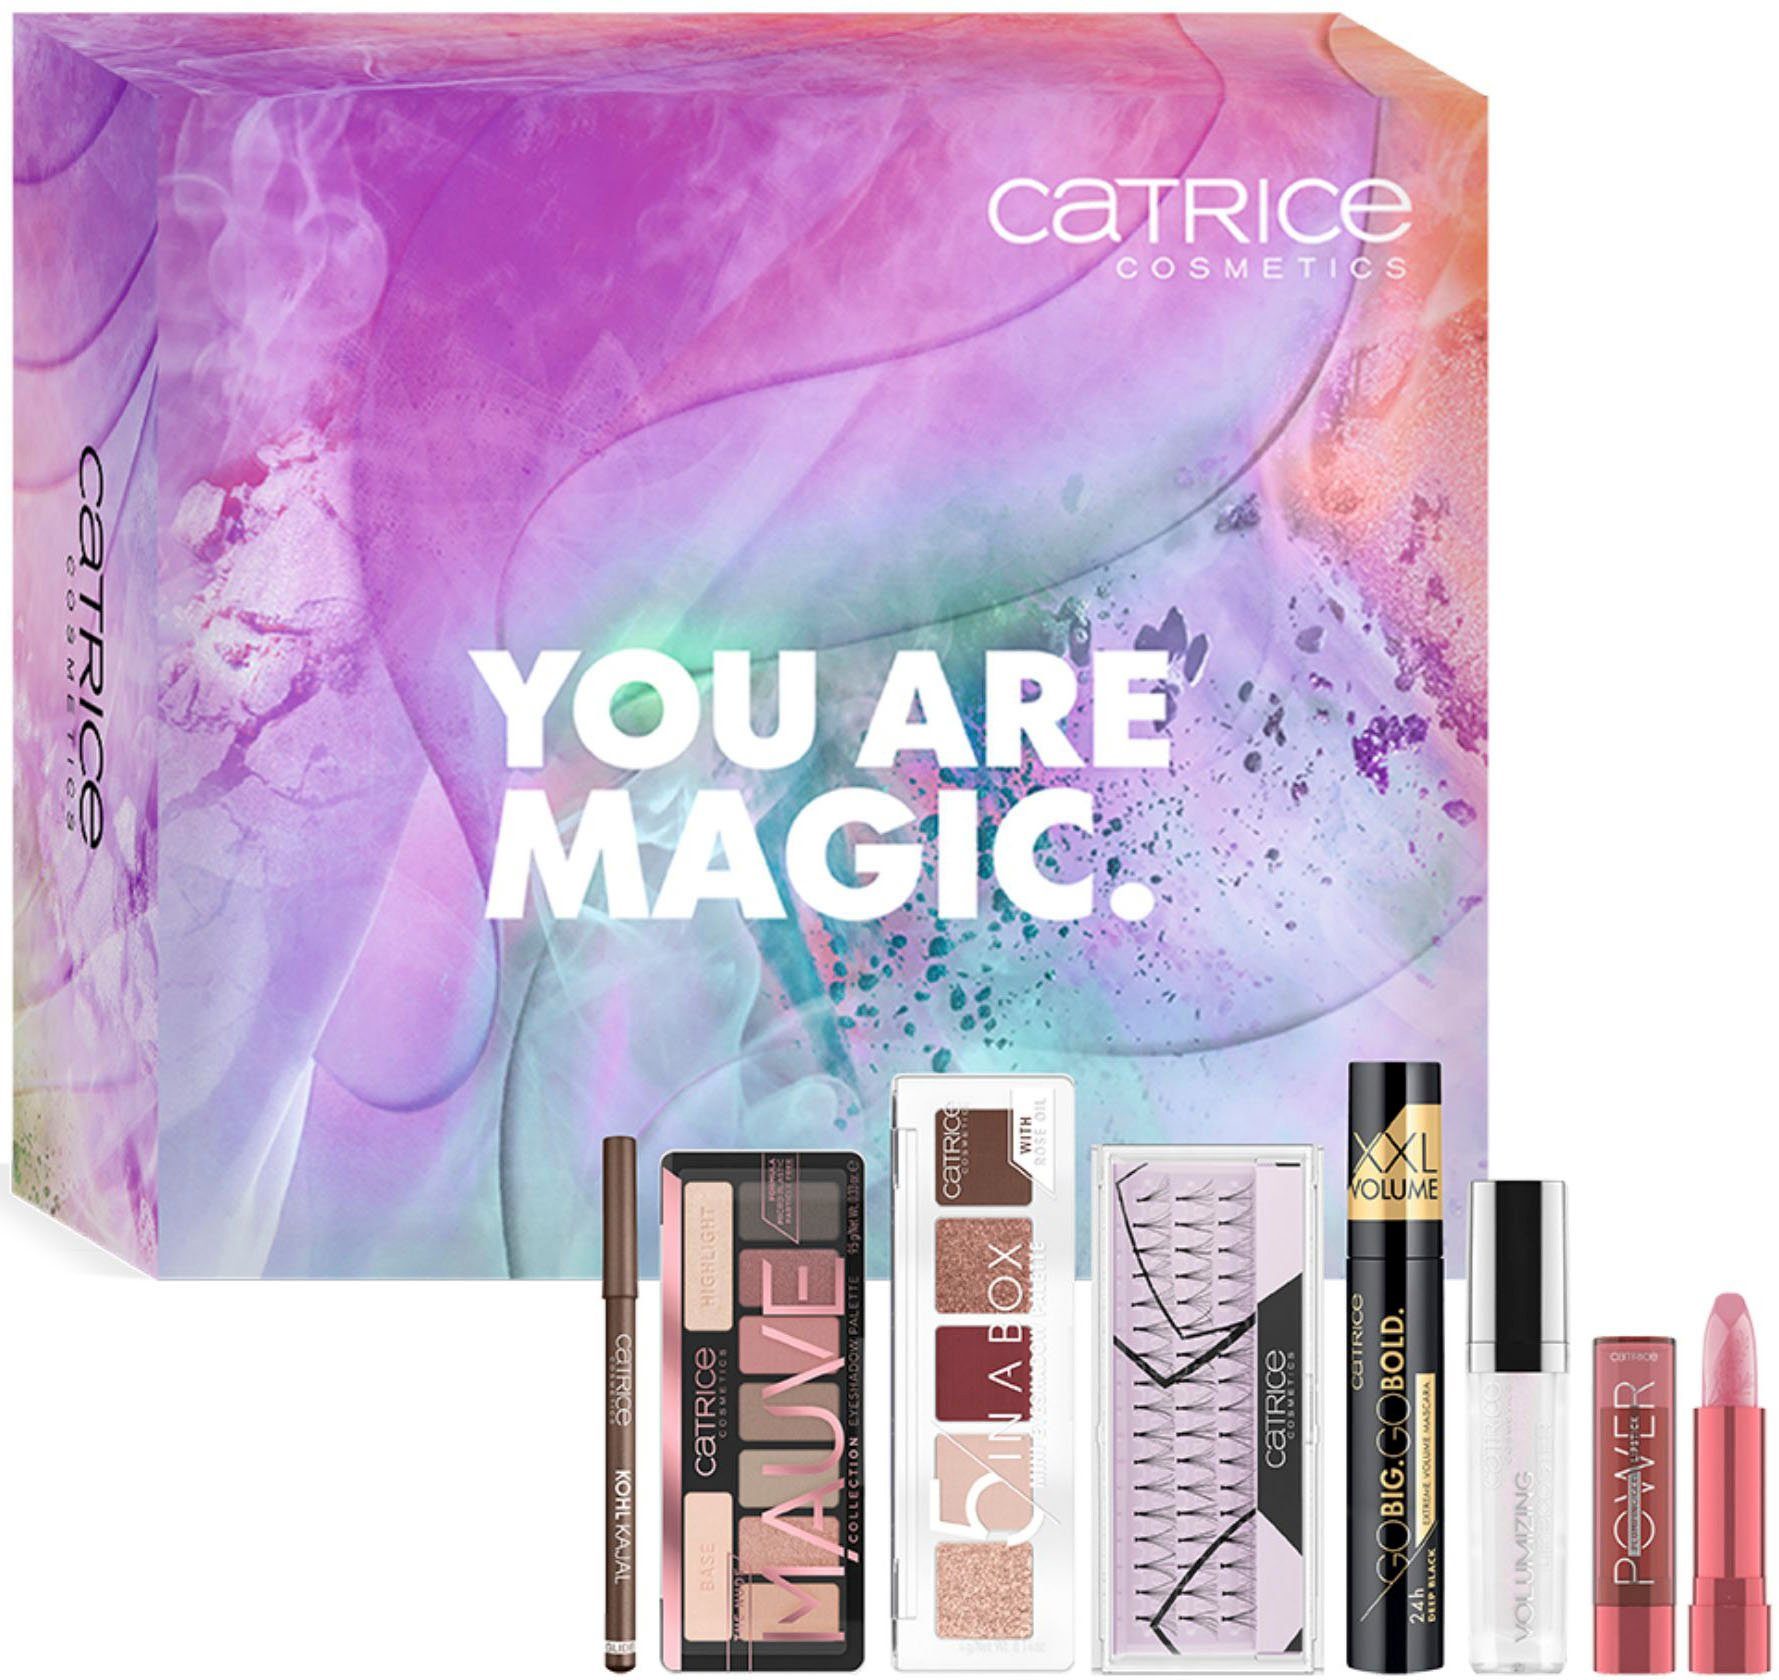 Augen-Make-Up-Set MAGIC ARE Box, Catrice YOU